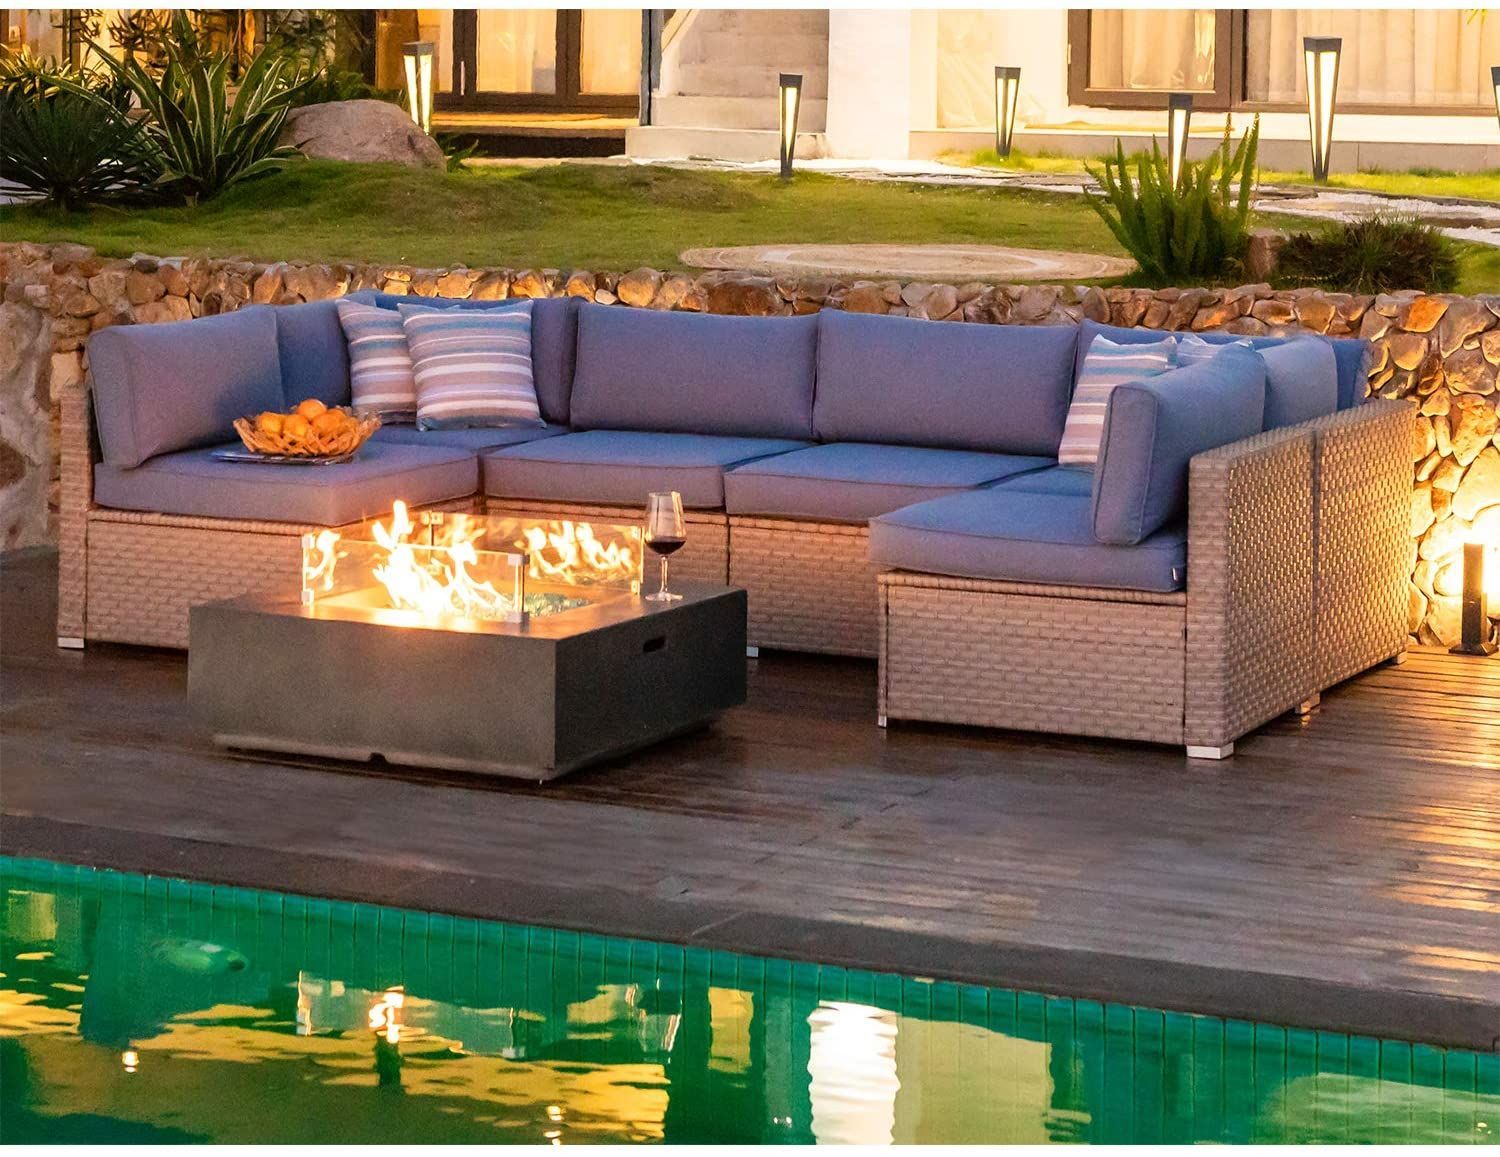 Cosiest 8 Piece Propane Fire Pit Outdoor Wicker Sectional Sofa, Warm Gray Patio  Furniture Set W 35 Inch Square Celadon Fire Table (50,000 Btu), Tank Cover  And W… | Gray Patio Furniture, Patio Throughout Fire Pit Table Wicker Sectional Sofa Conversation Set (View 15 of 15)